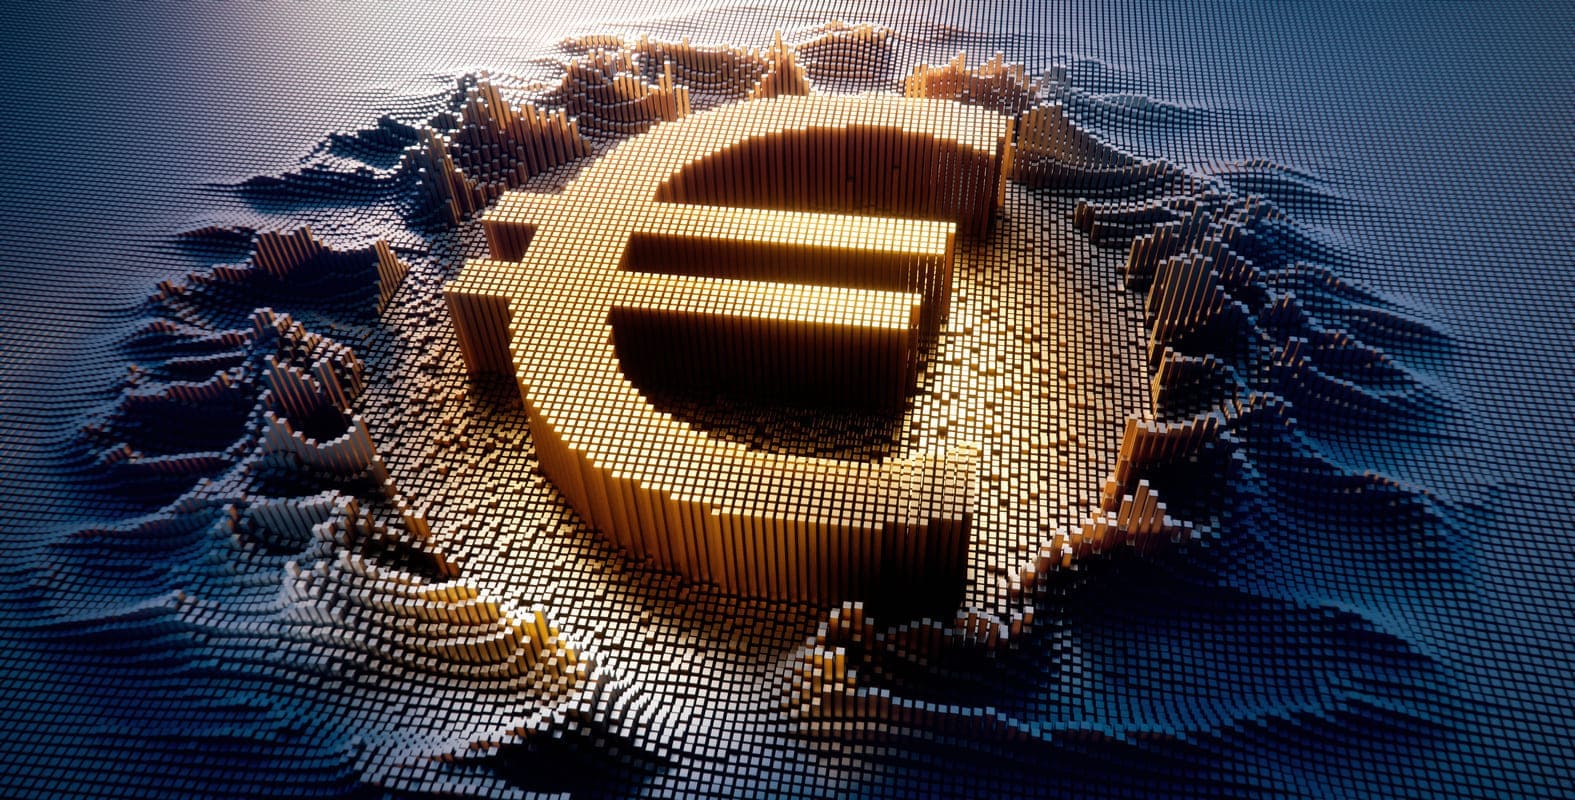 ECB will decide in the fall on a digital euro, says ECB official